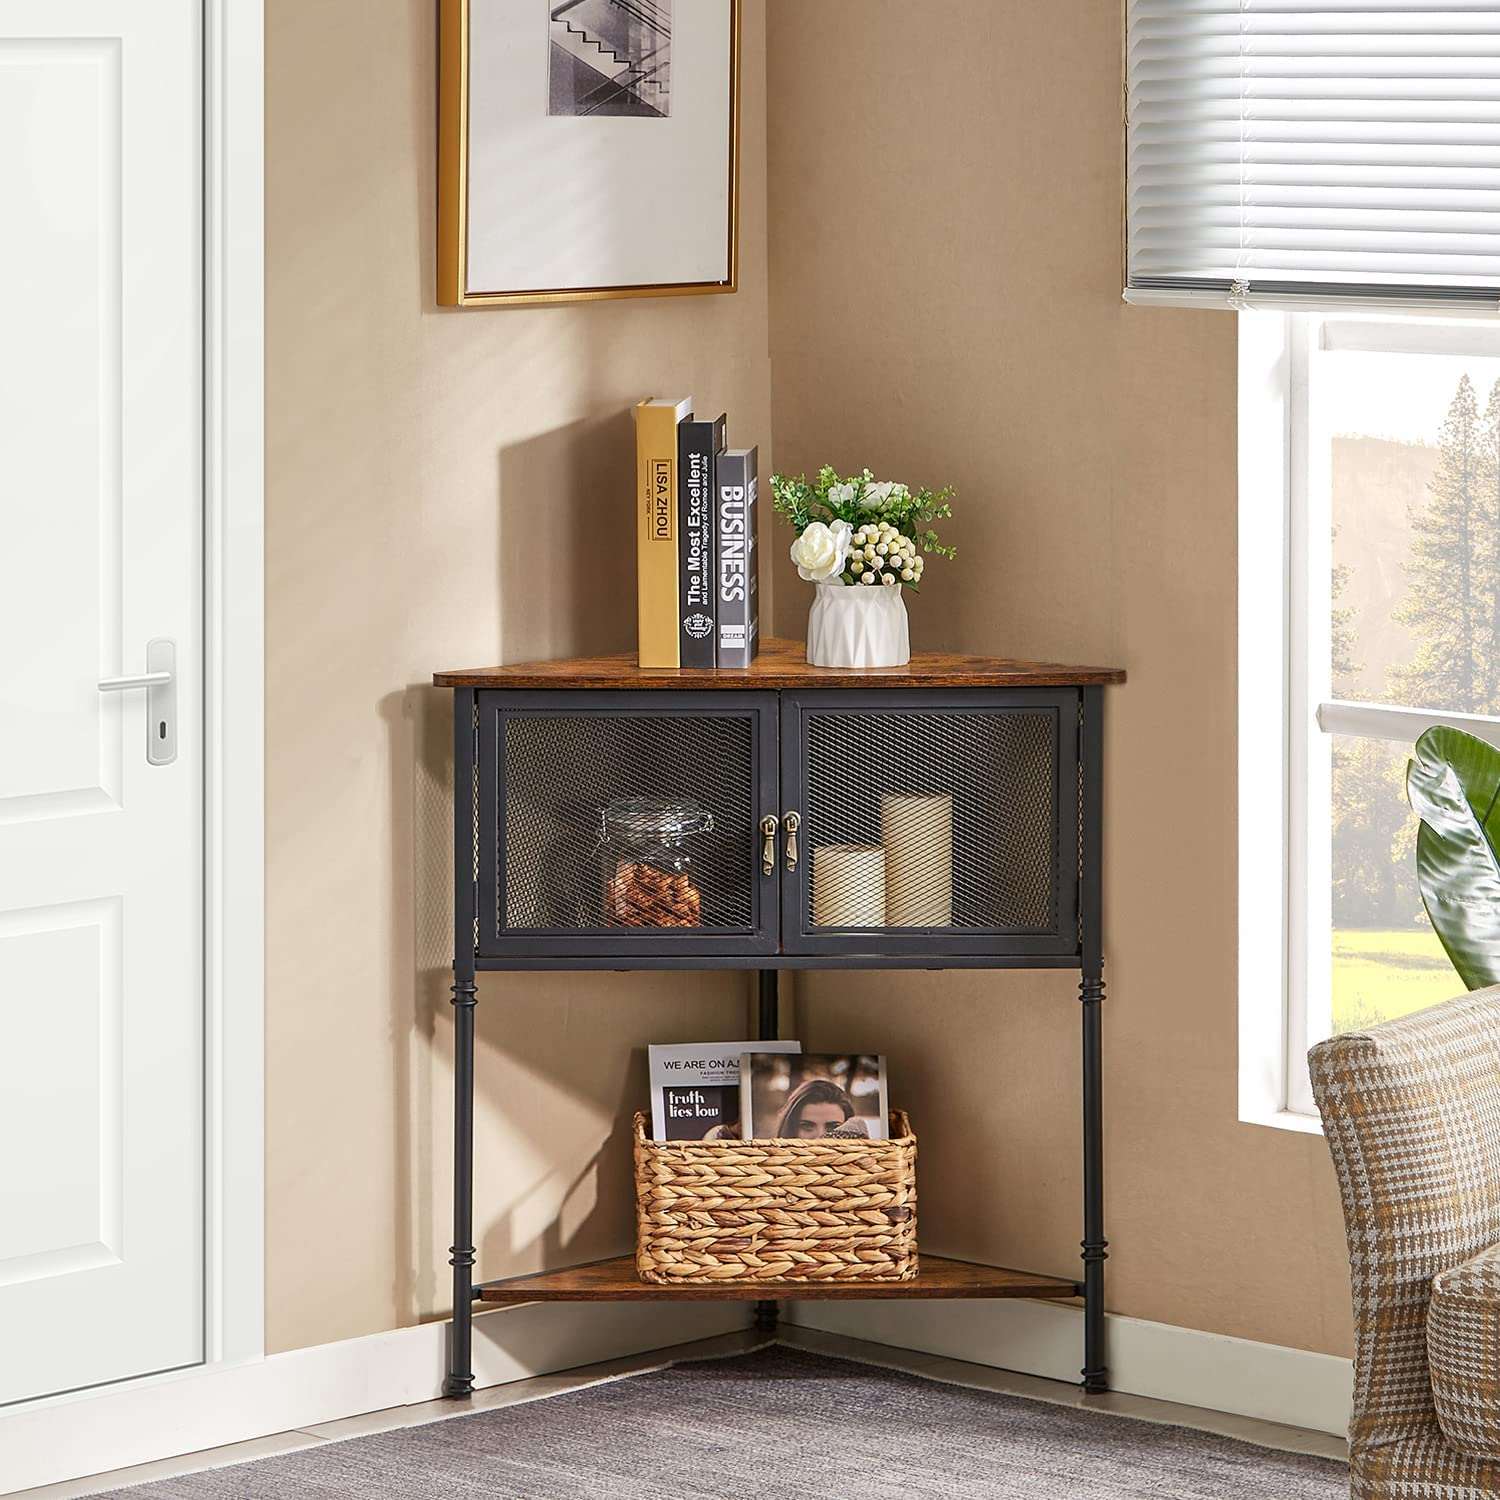 VECELO Corner Display Shelf Free-Standing Organizer for Compact Space